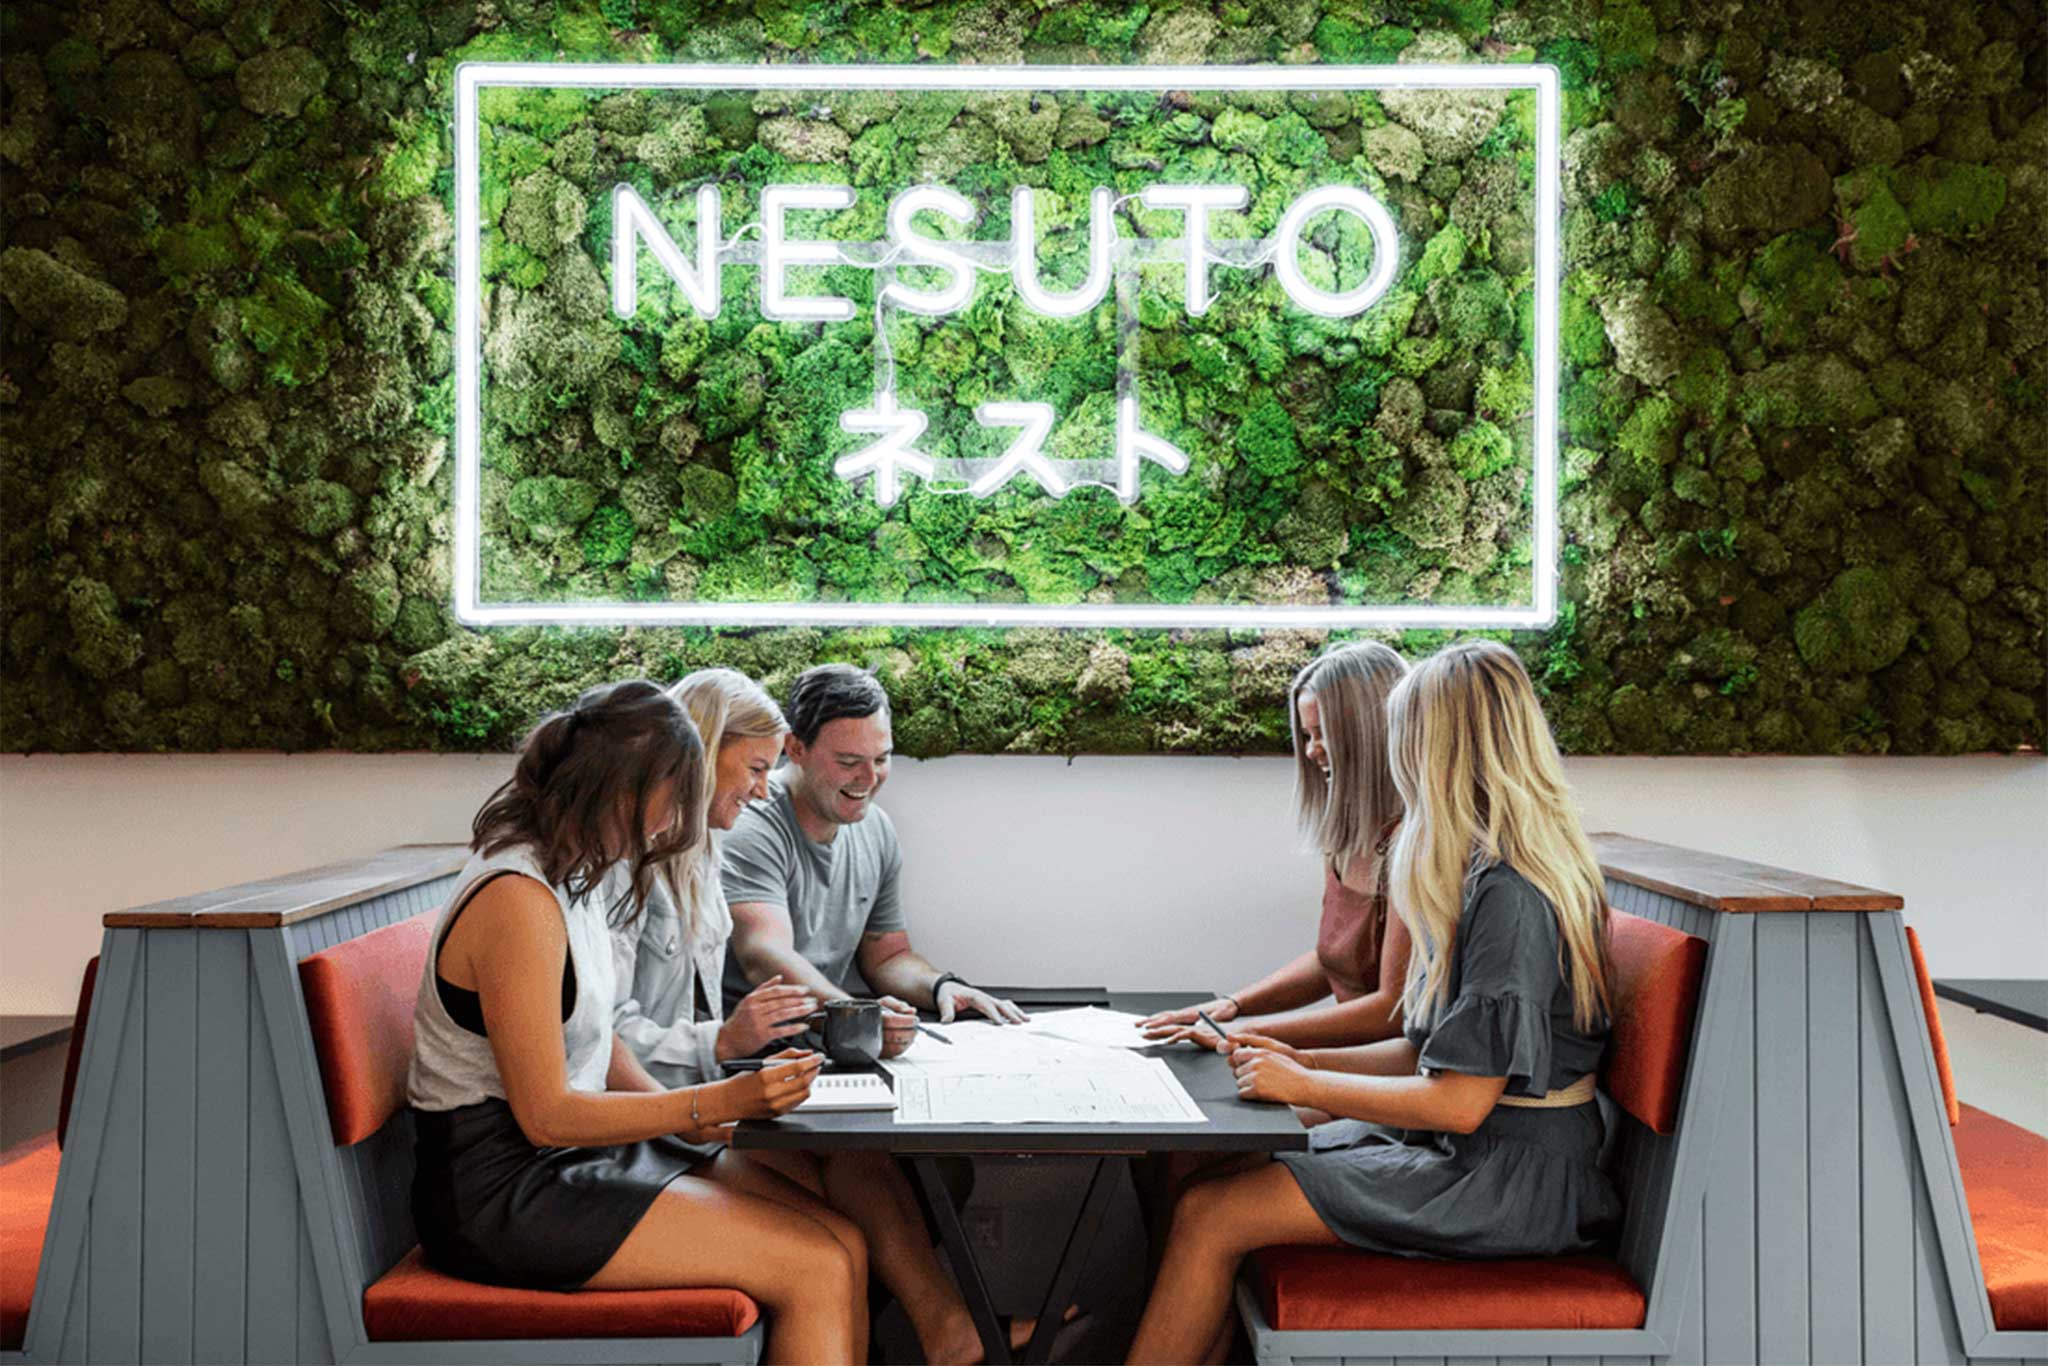 Moss Wall - Project "Neon Nesuto" - Nesuto Moss Wall signage in coworking space